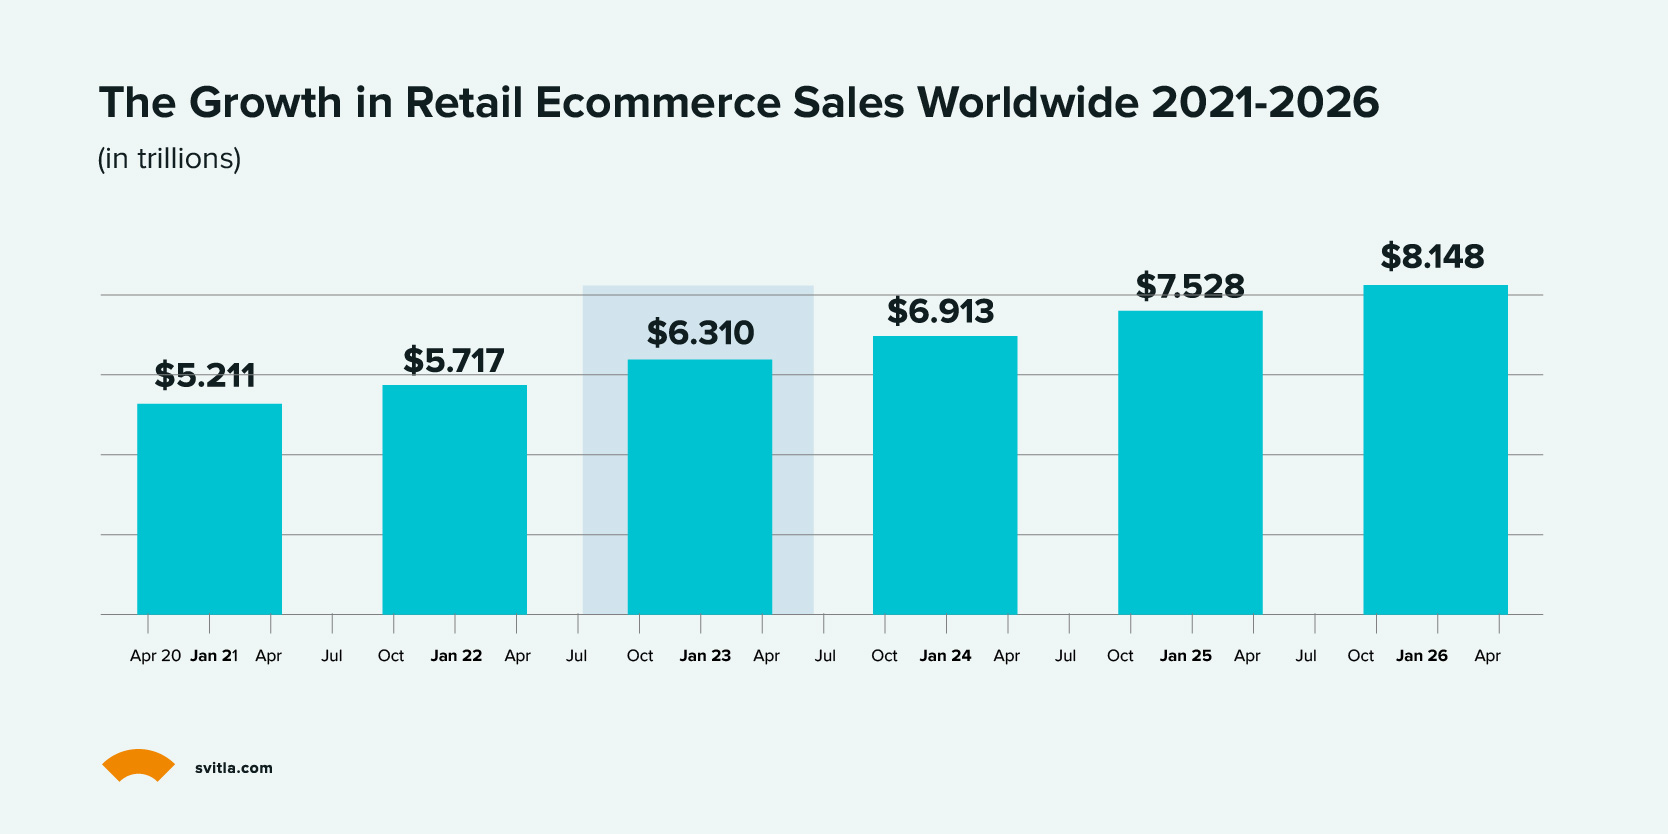 The Growth in Retail Ecommerce Sales Worldwide